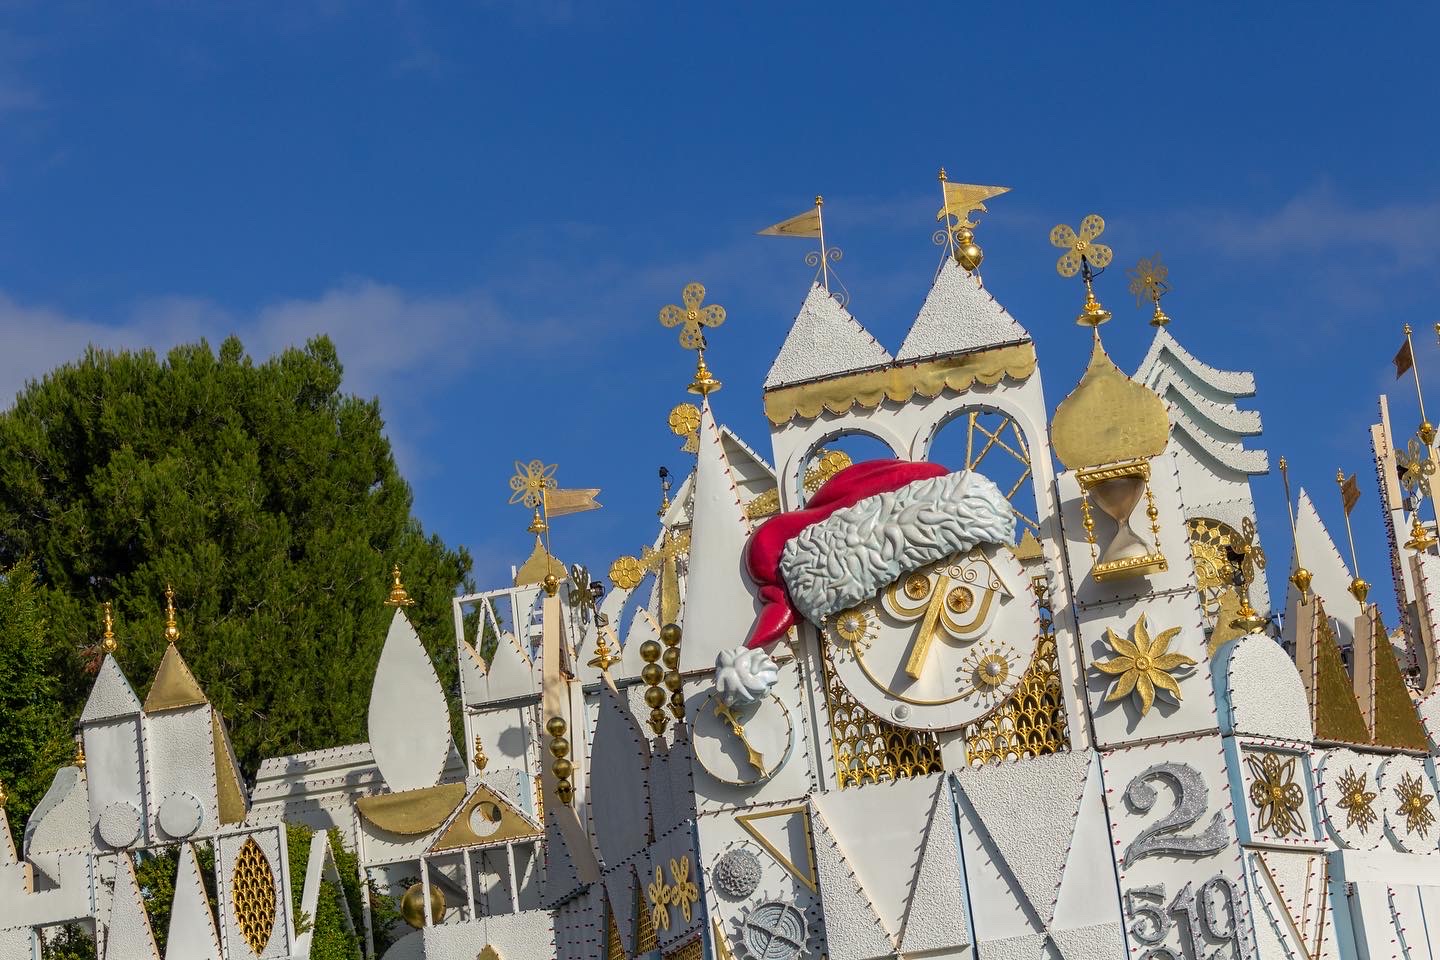 White textured geometric shapes form the top edge of the It's a Small World ride against a blue sky and line of green trees; the round white and gold face in the middle wears a large Santa hat